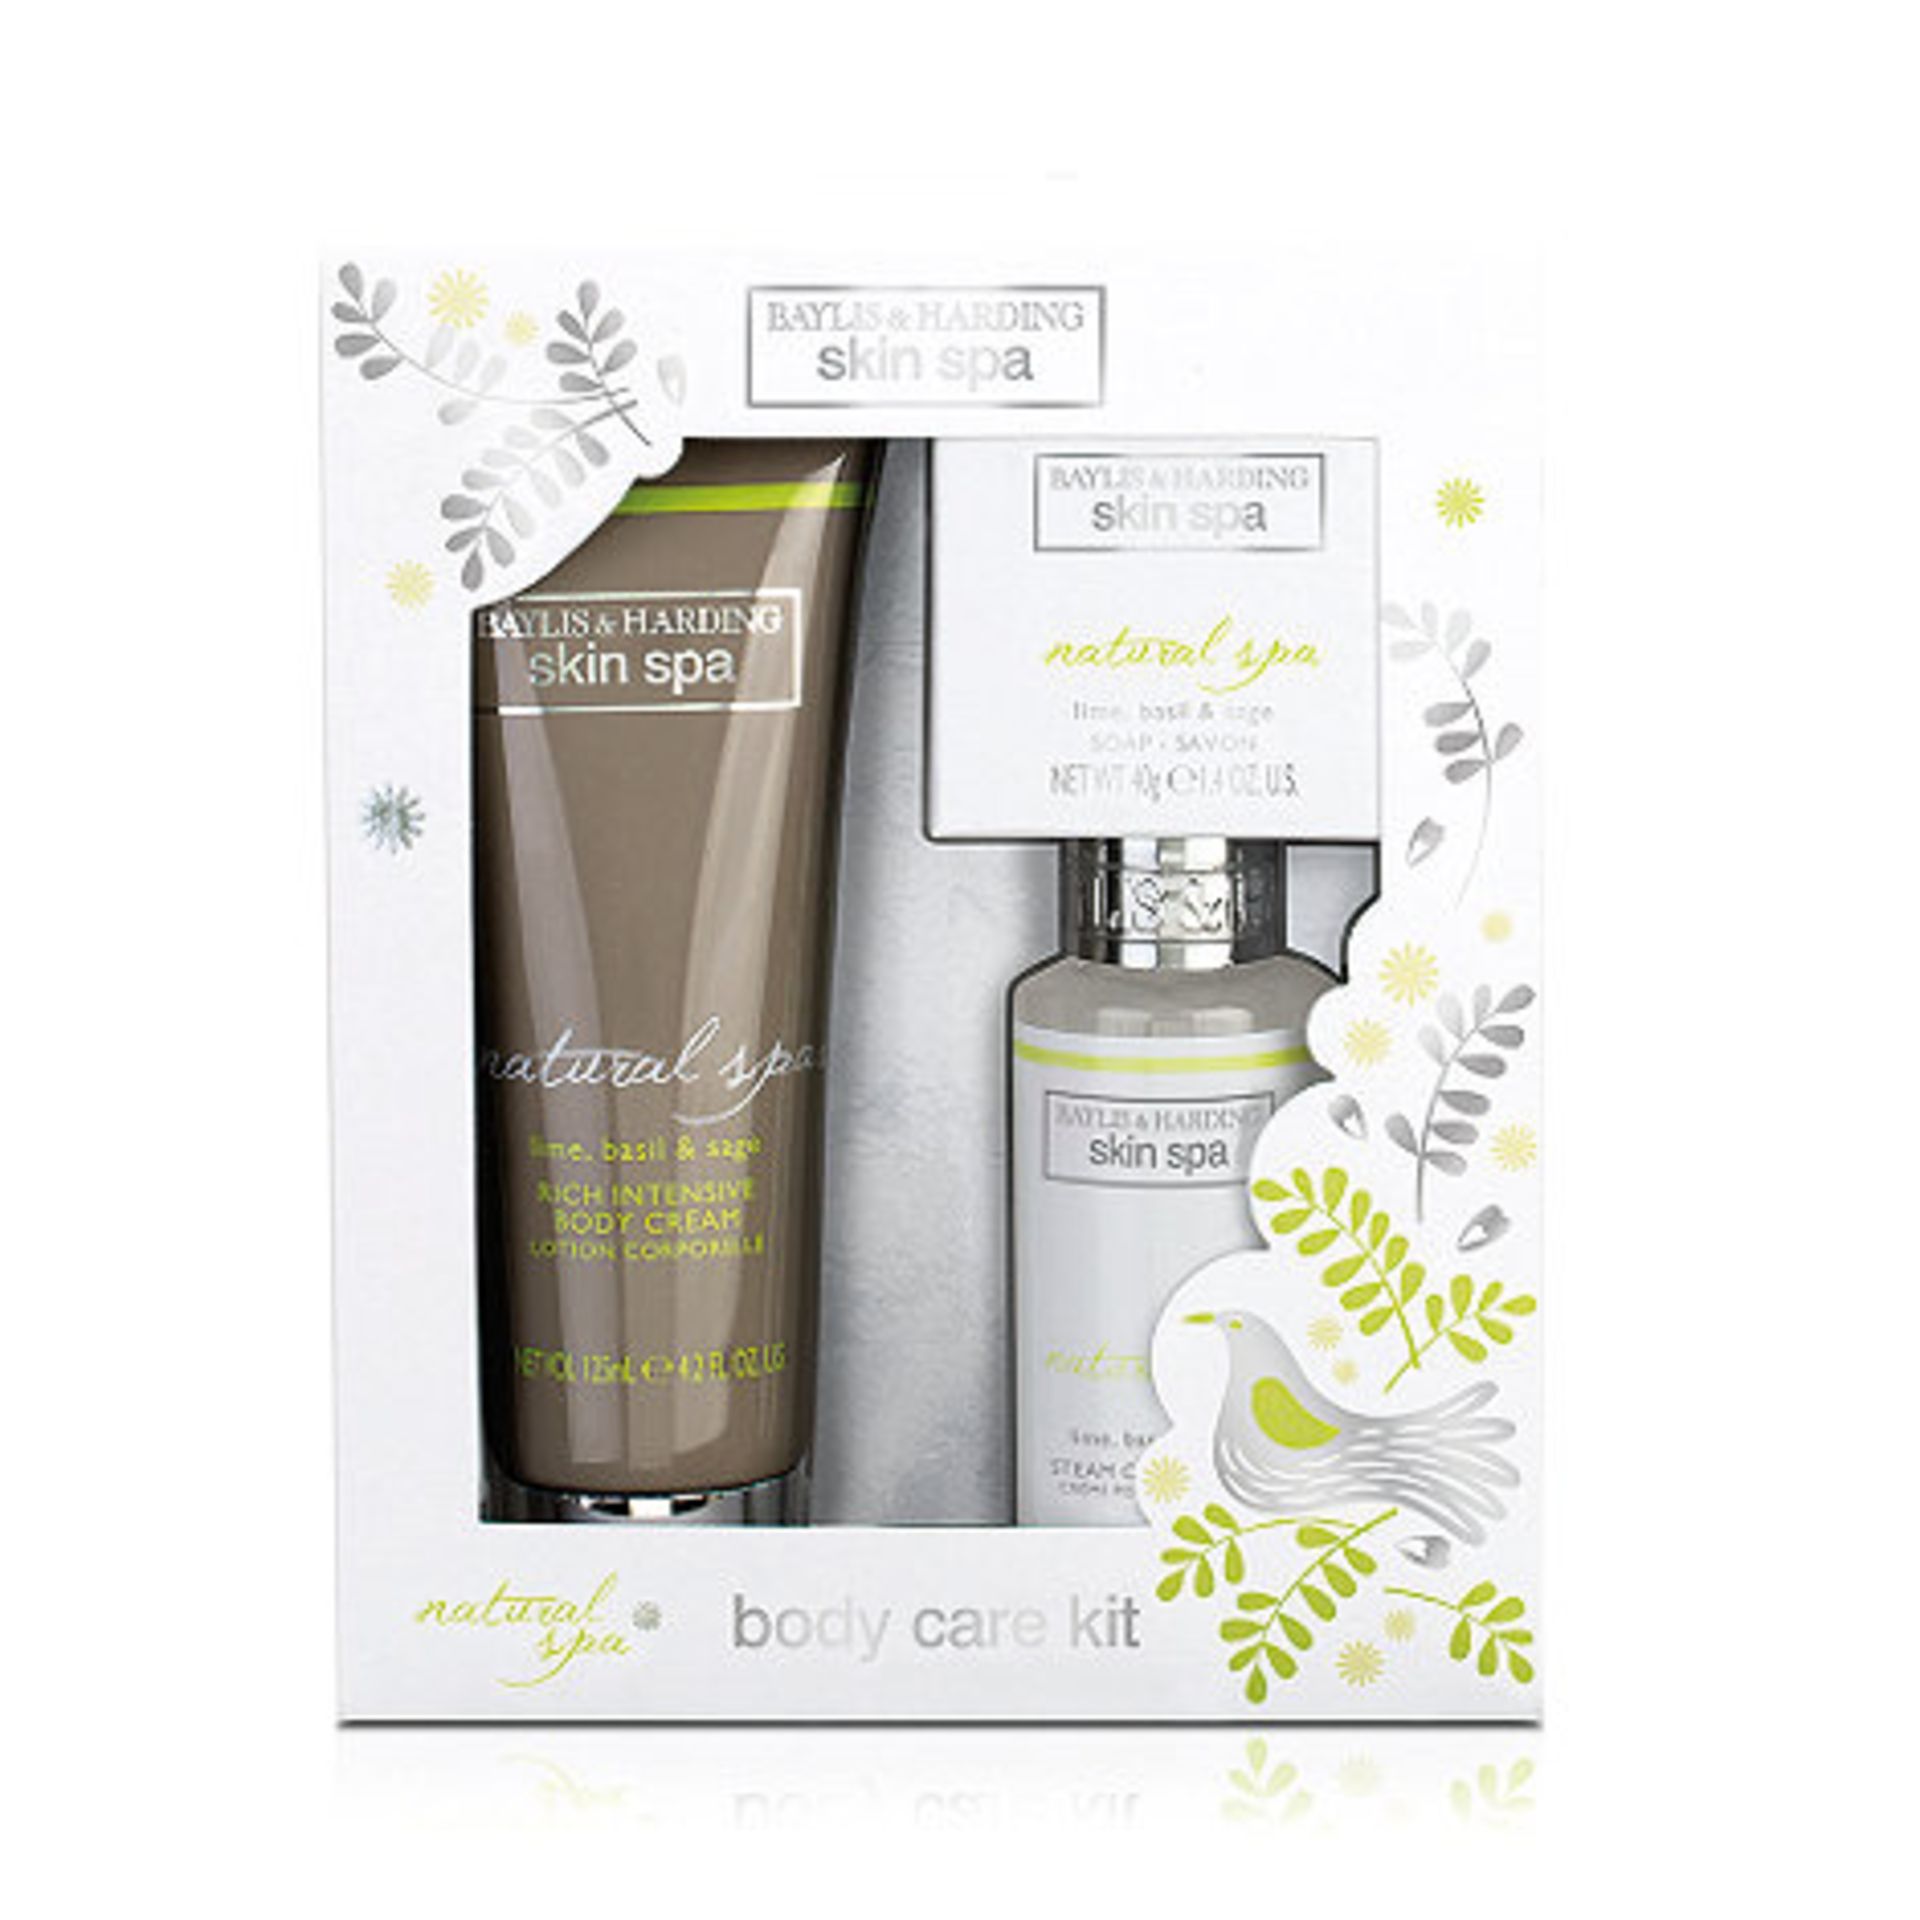 V *TRADE QTY* Brand New Baylis & Harding Lime Basil And Sage Body Care Trio Set Inc Rich Intensive